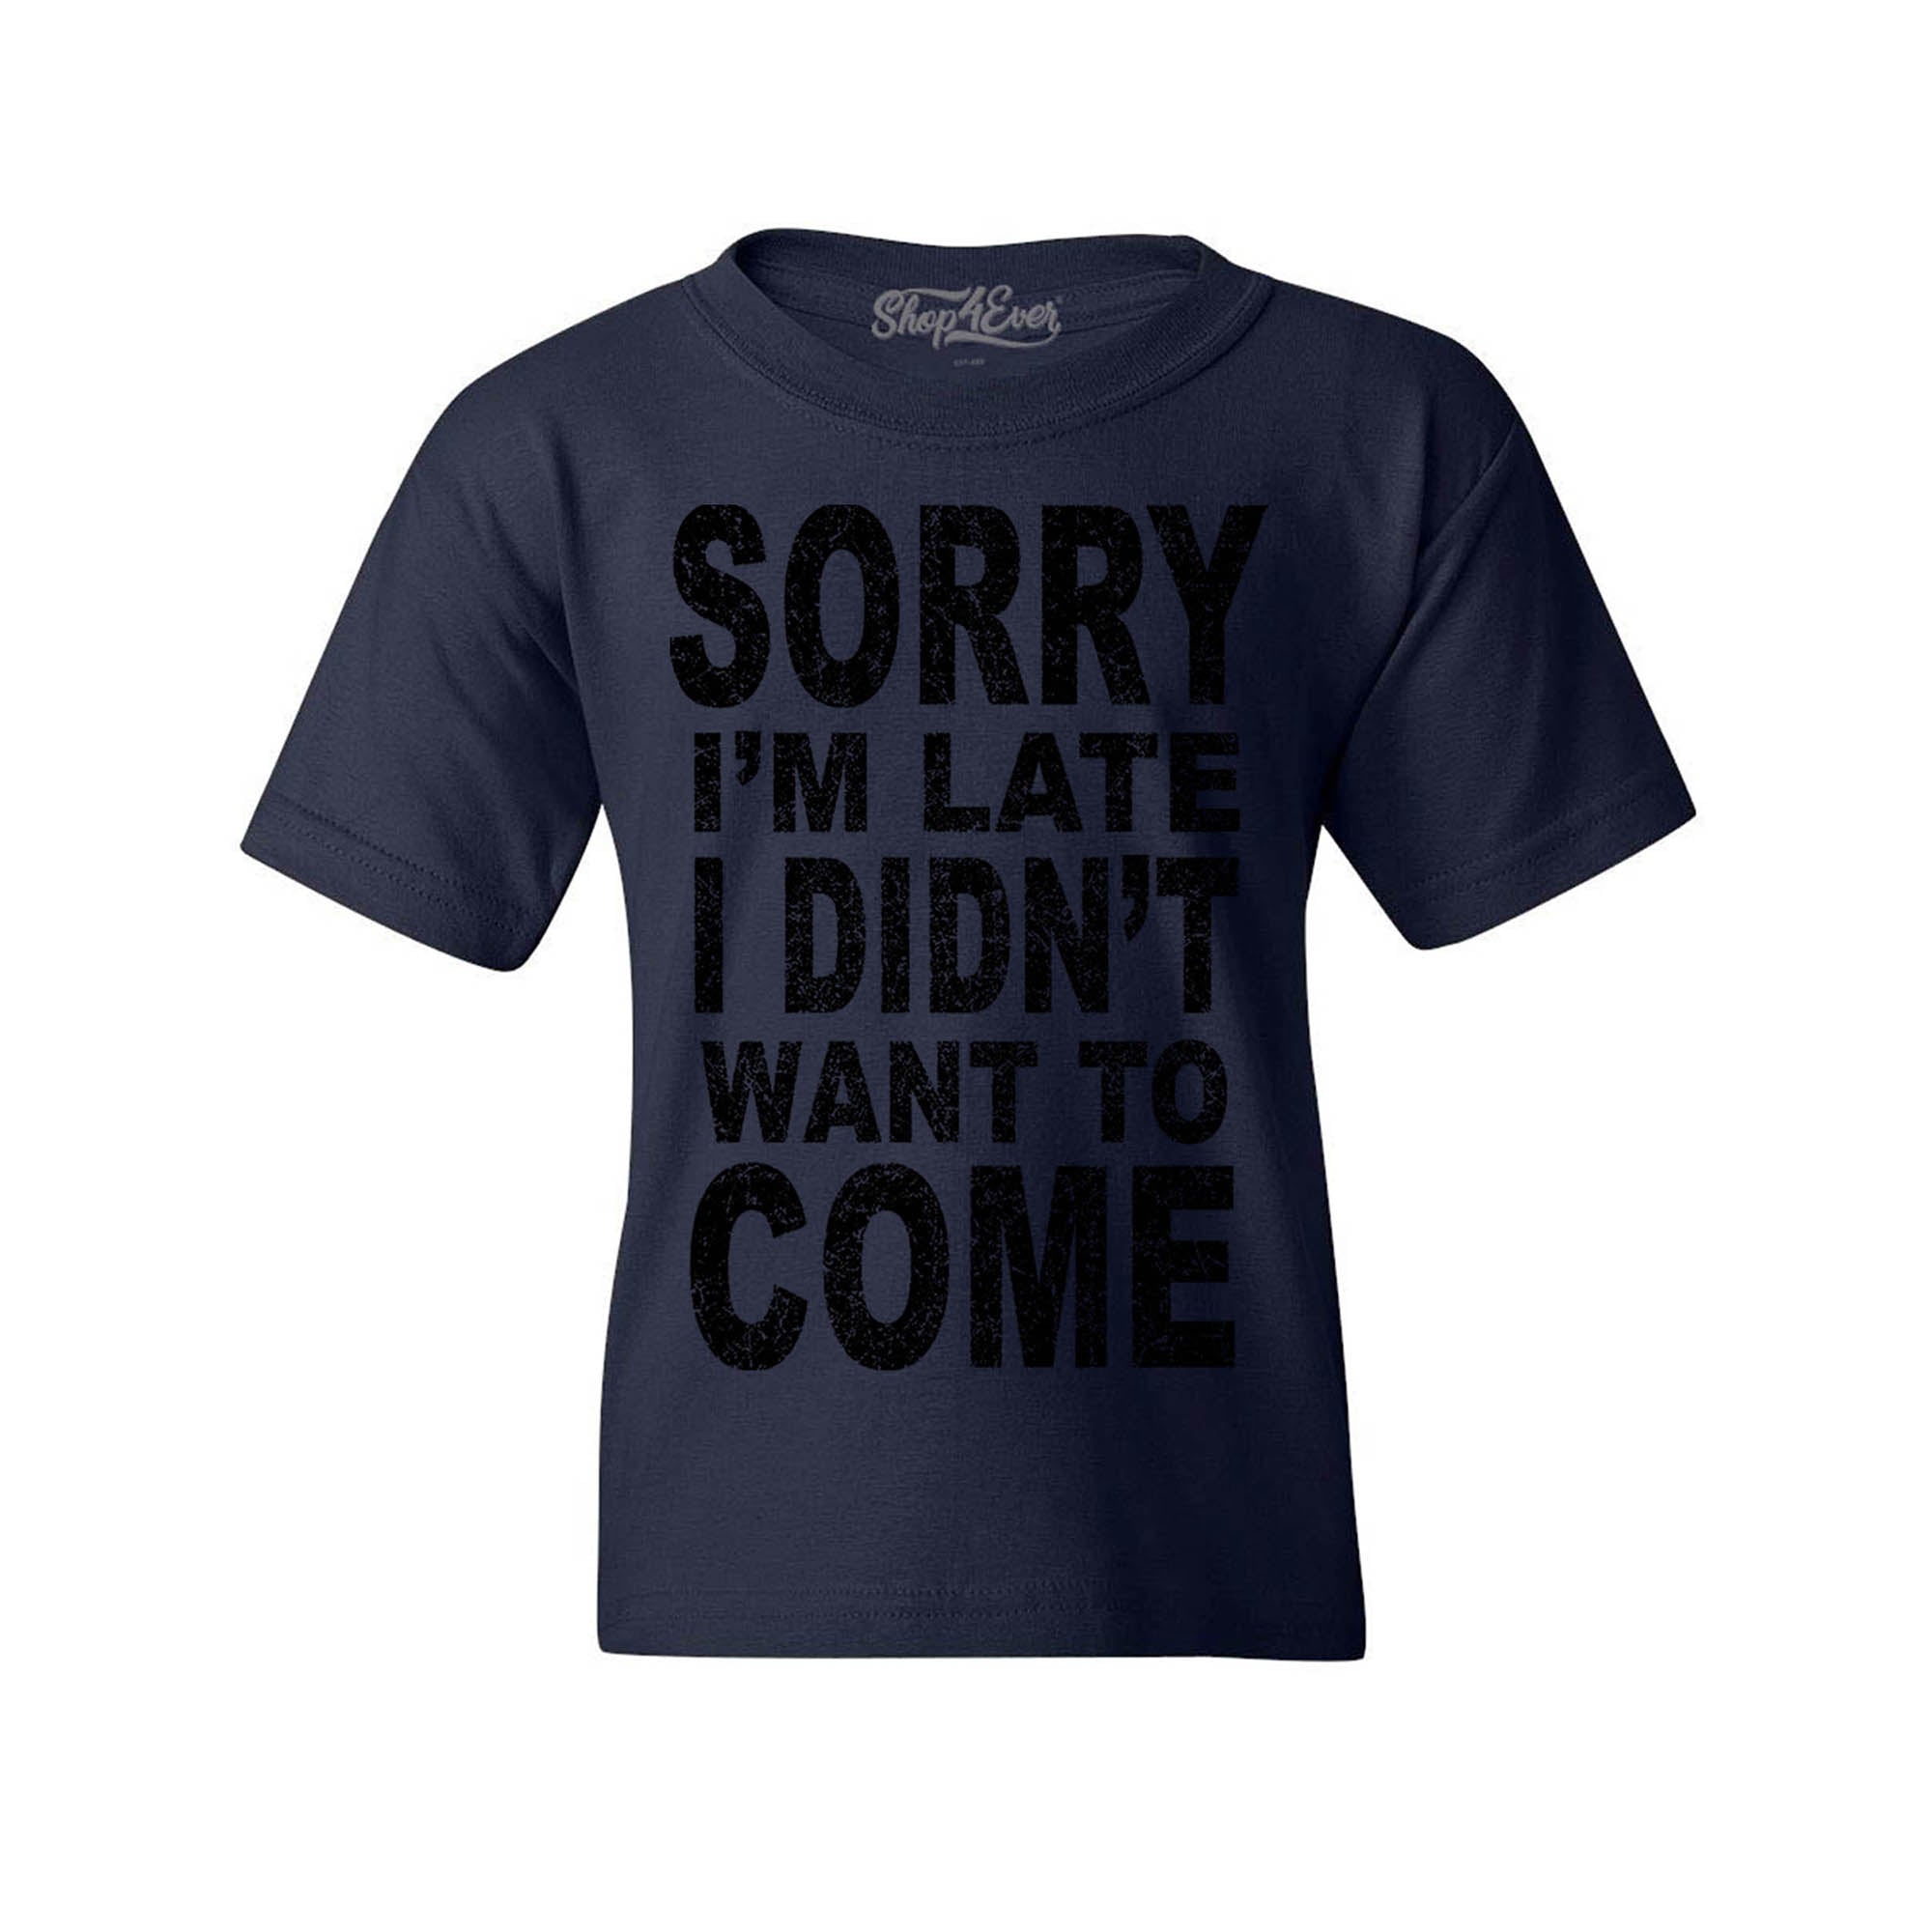 Sorry I'm Late I Didn't Want to Come Black Youth's T-Shirt Sayings Shirts